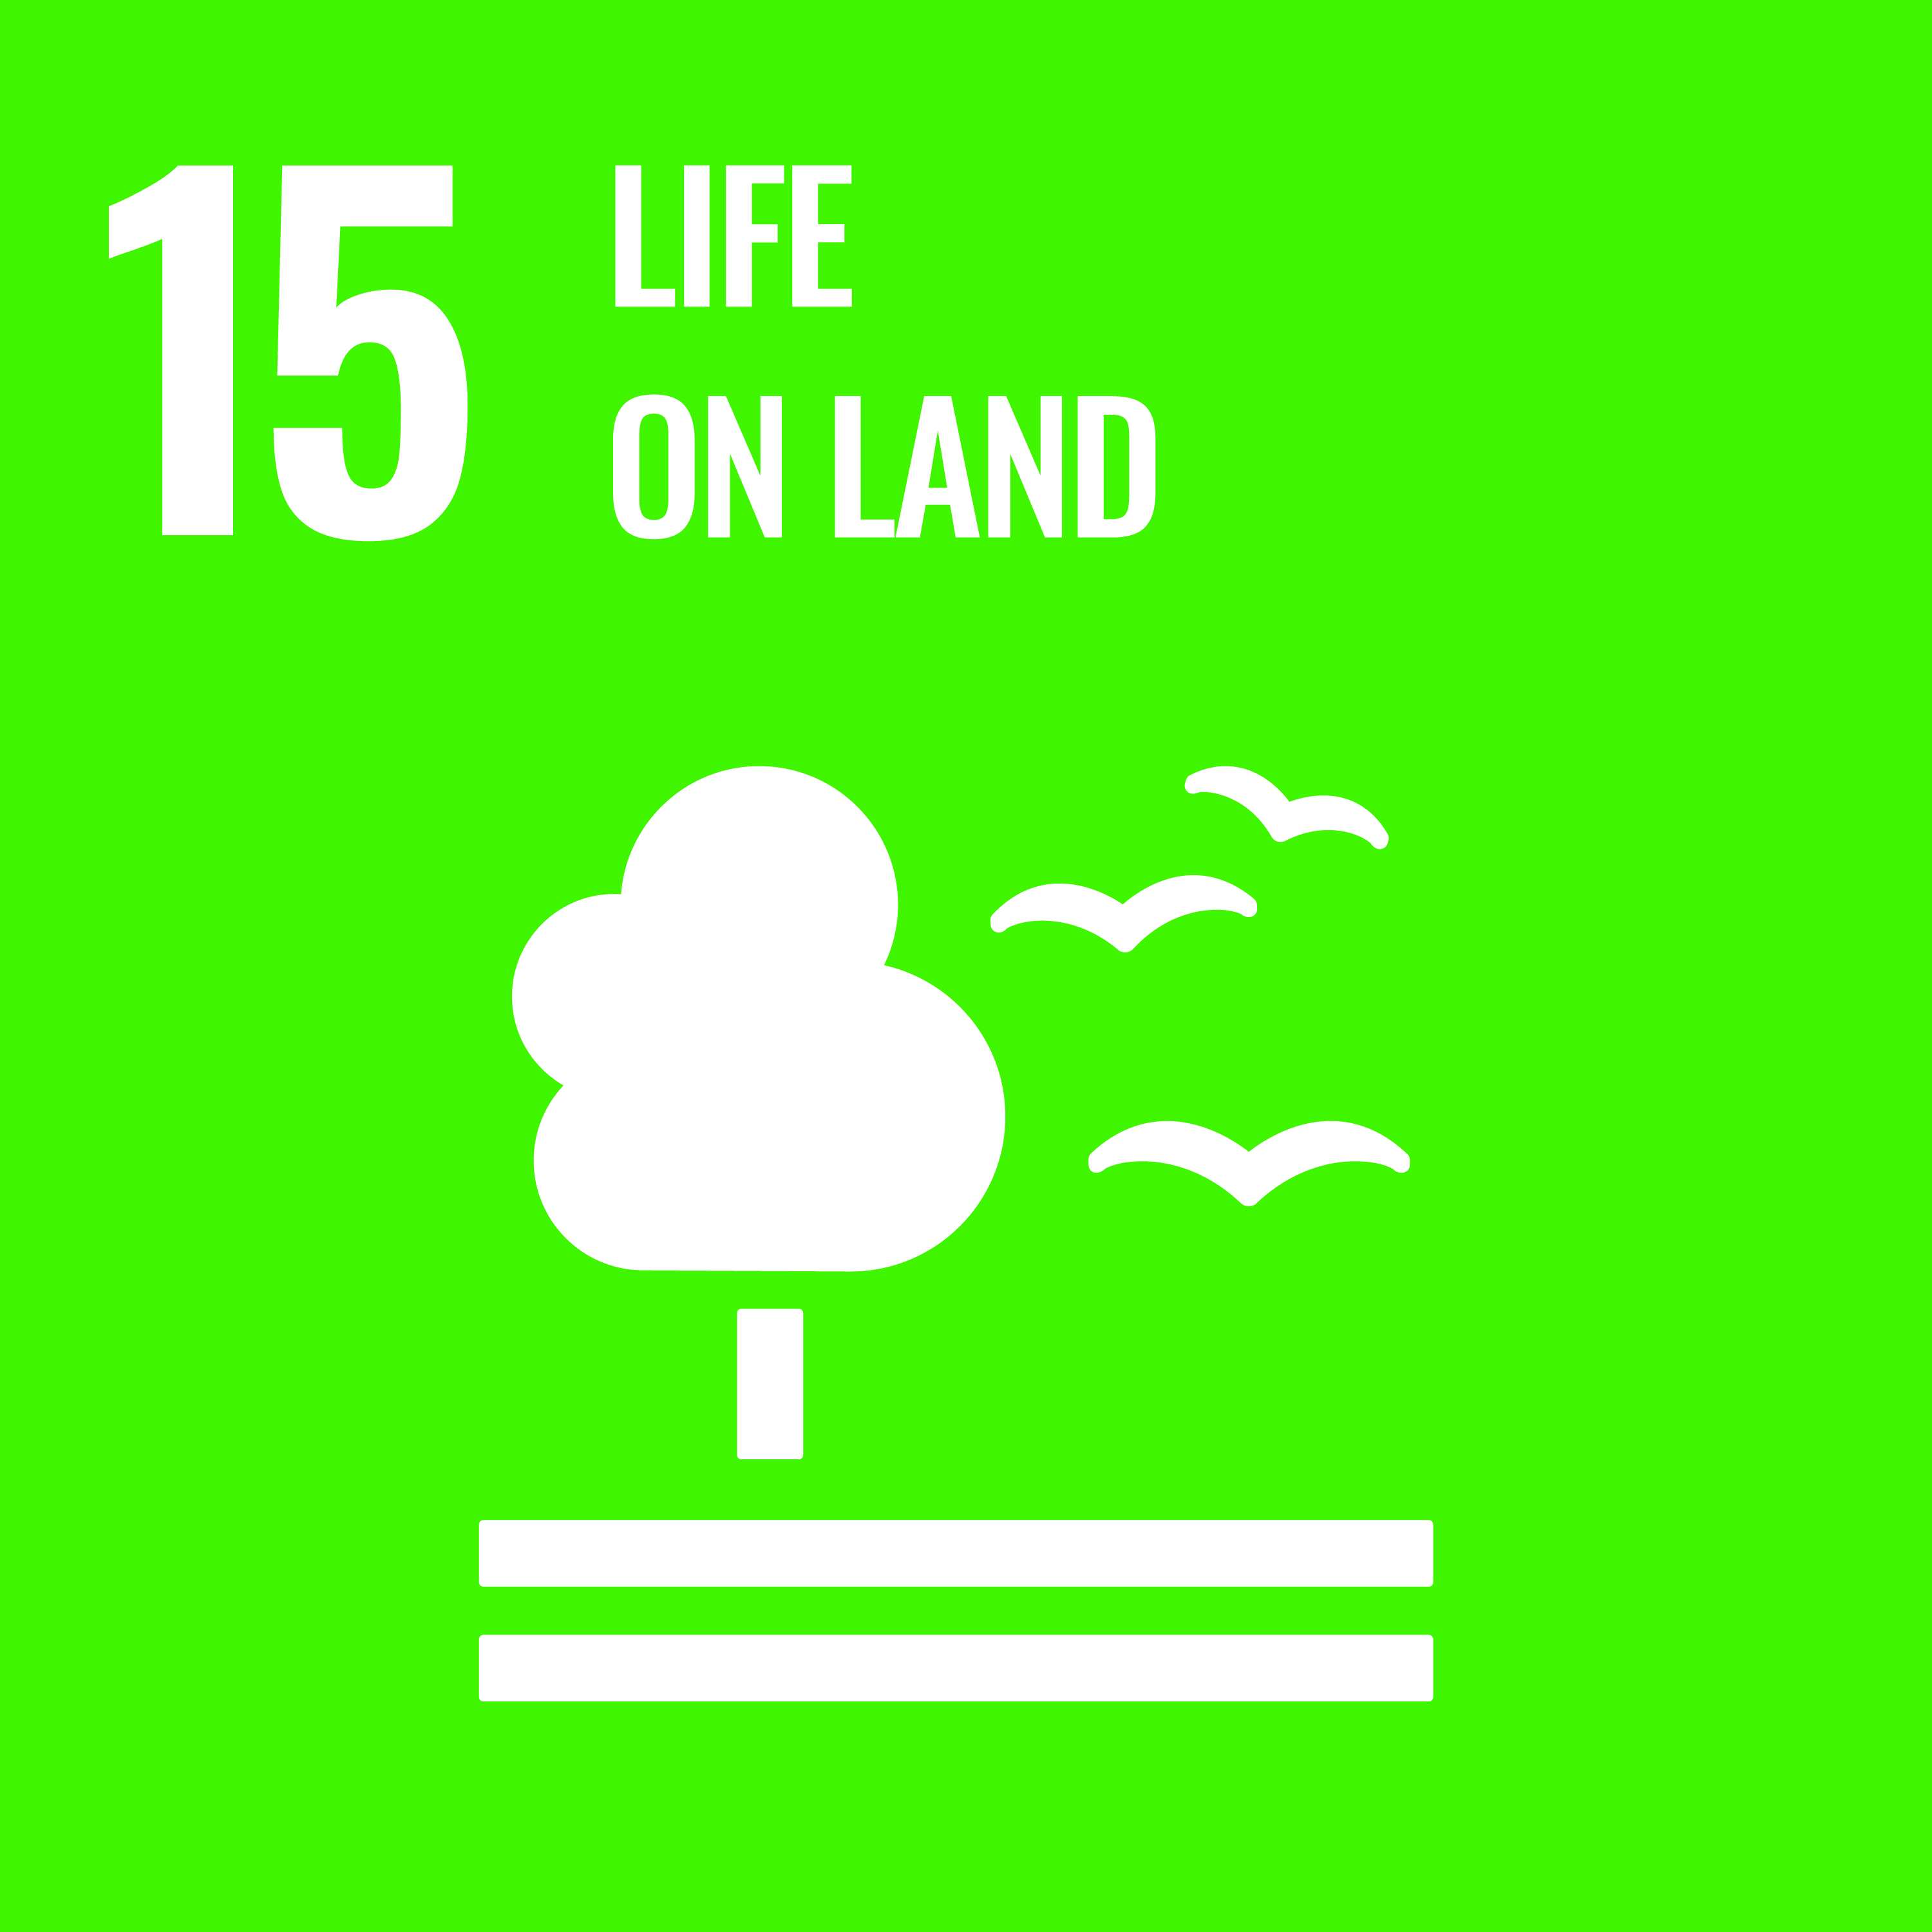 A green icon depicting a tree with birds in flight and the text "15: Life on Land"